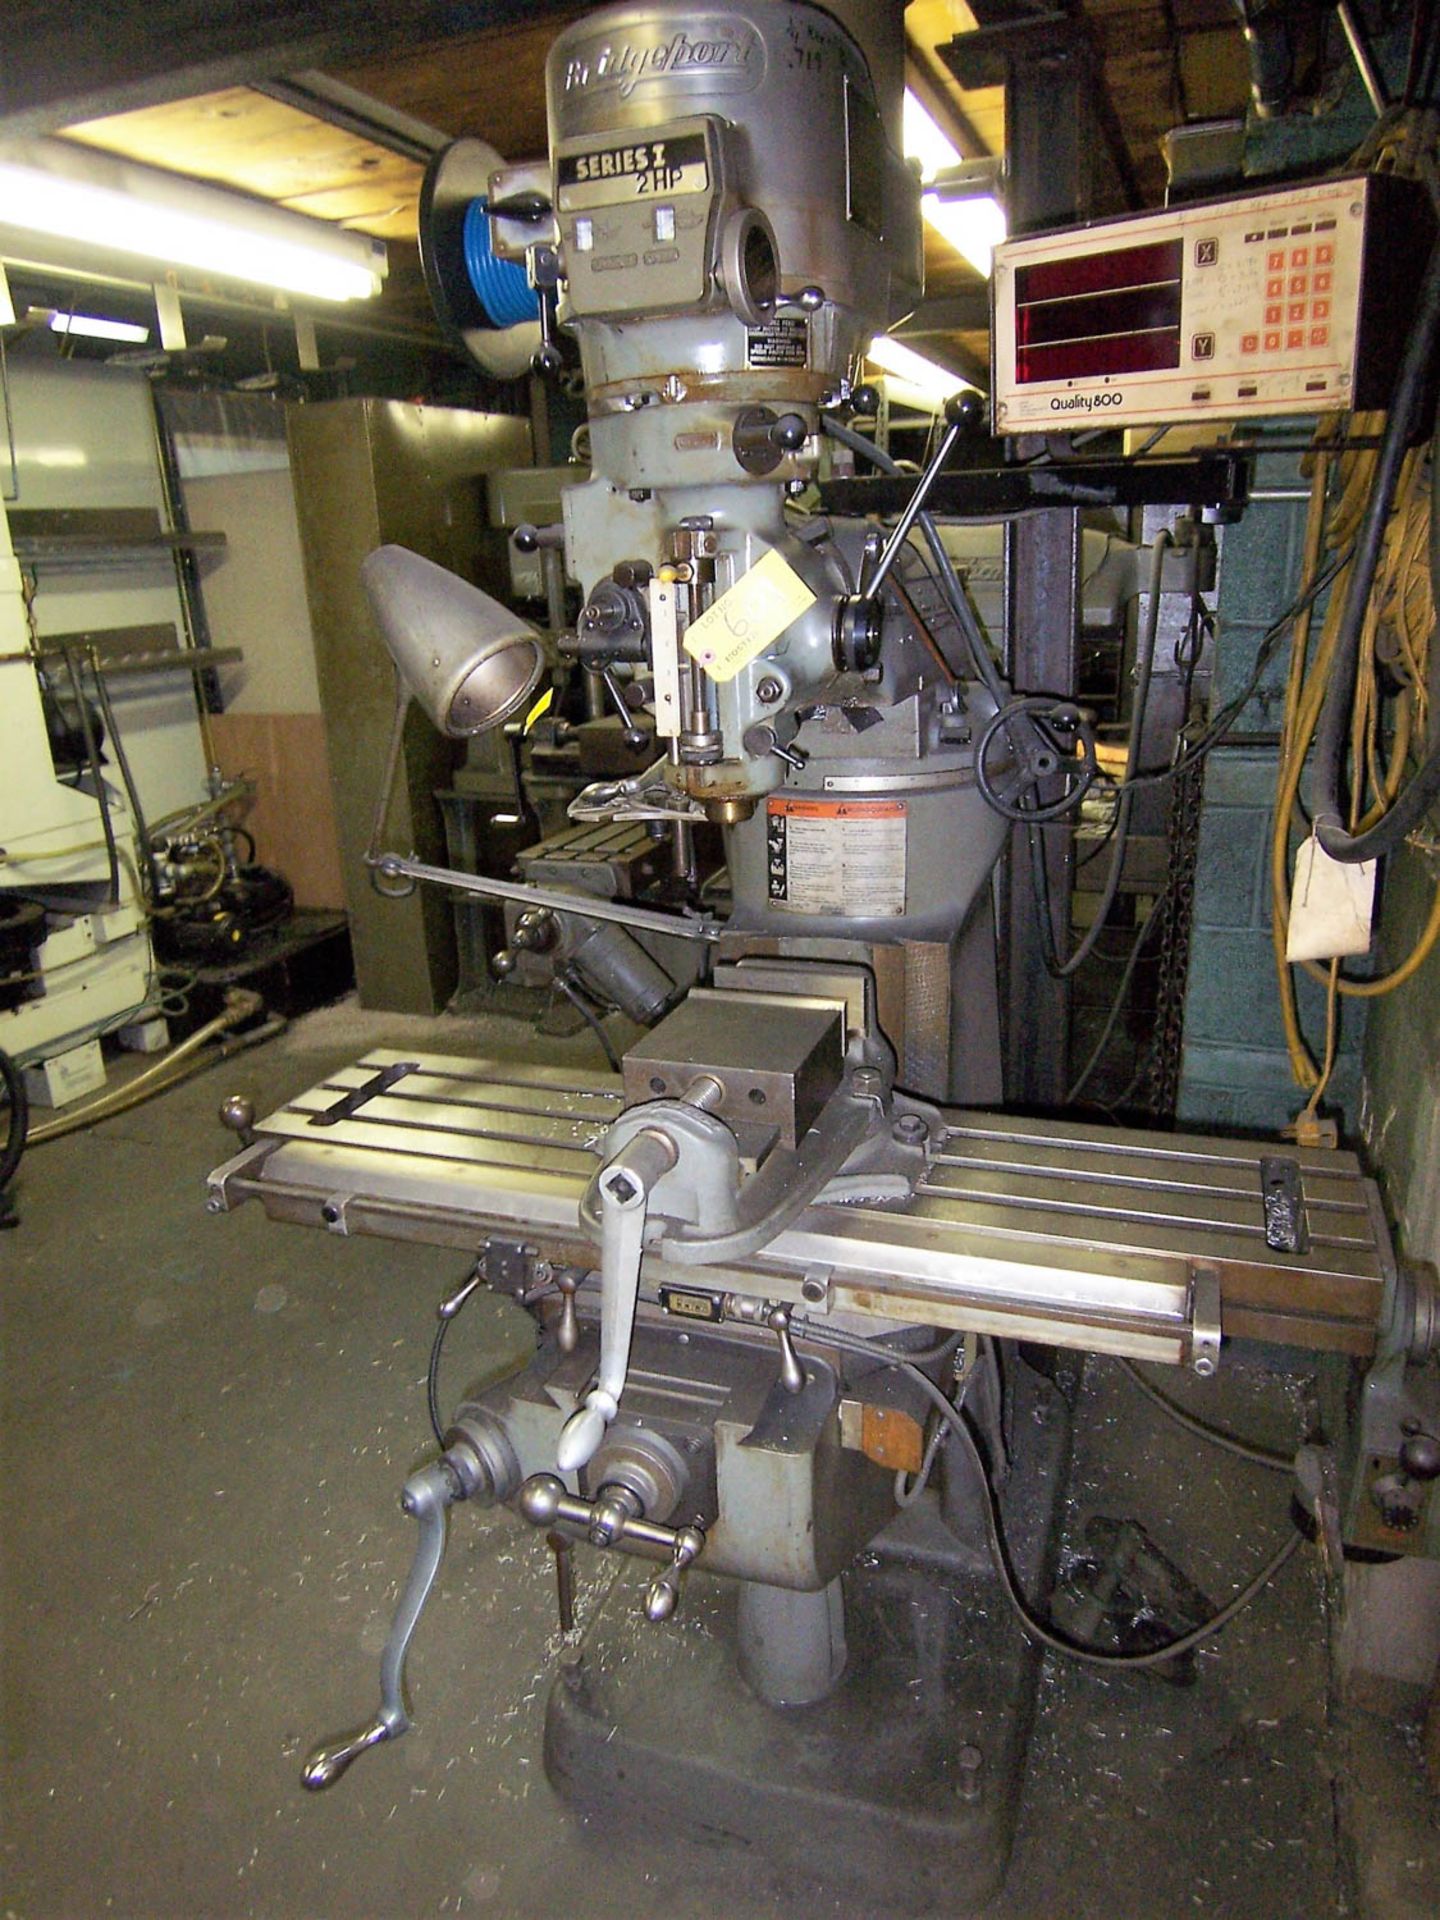 BRIDGEPORT SERIES I 2HP VERTICAL MILLING MACHINE, WITH 9'' X 42'' POWER FEED TABLE, SPINDLE SPEEDS